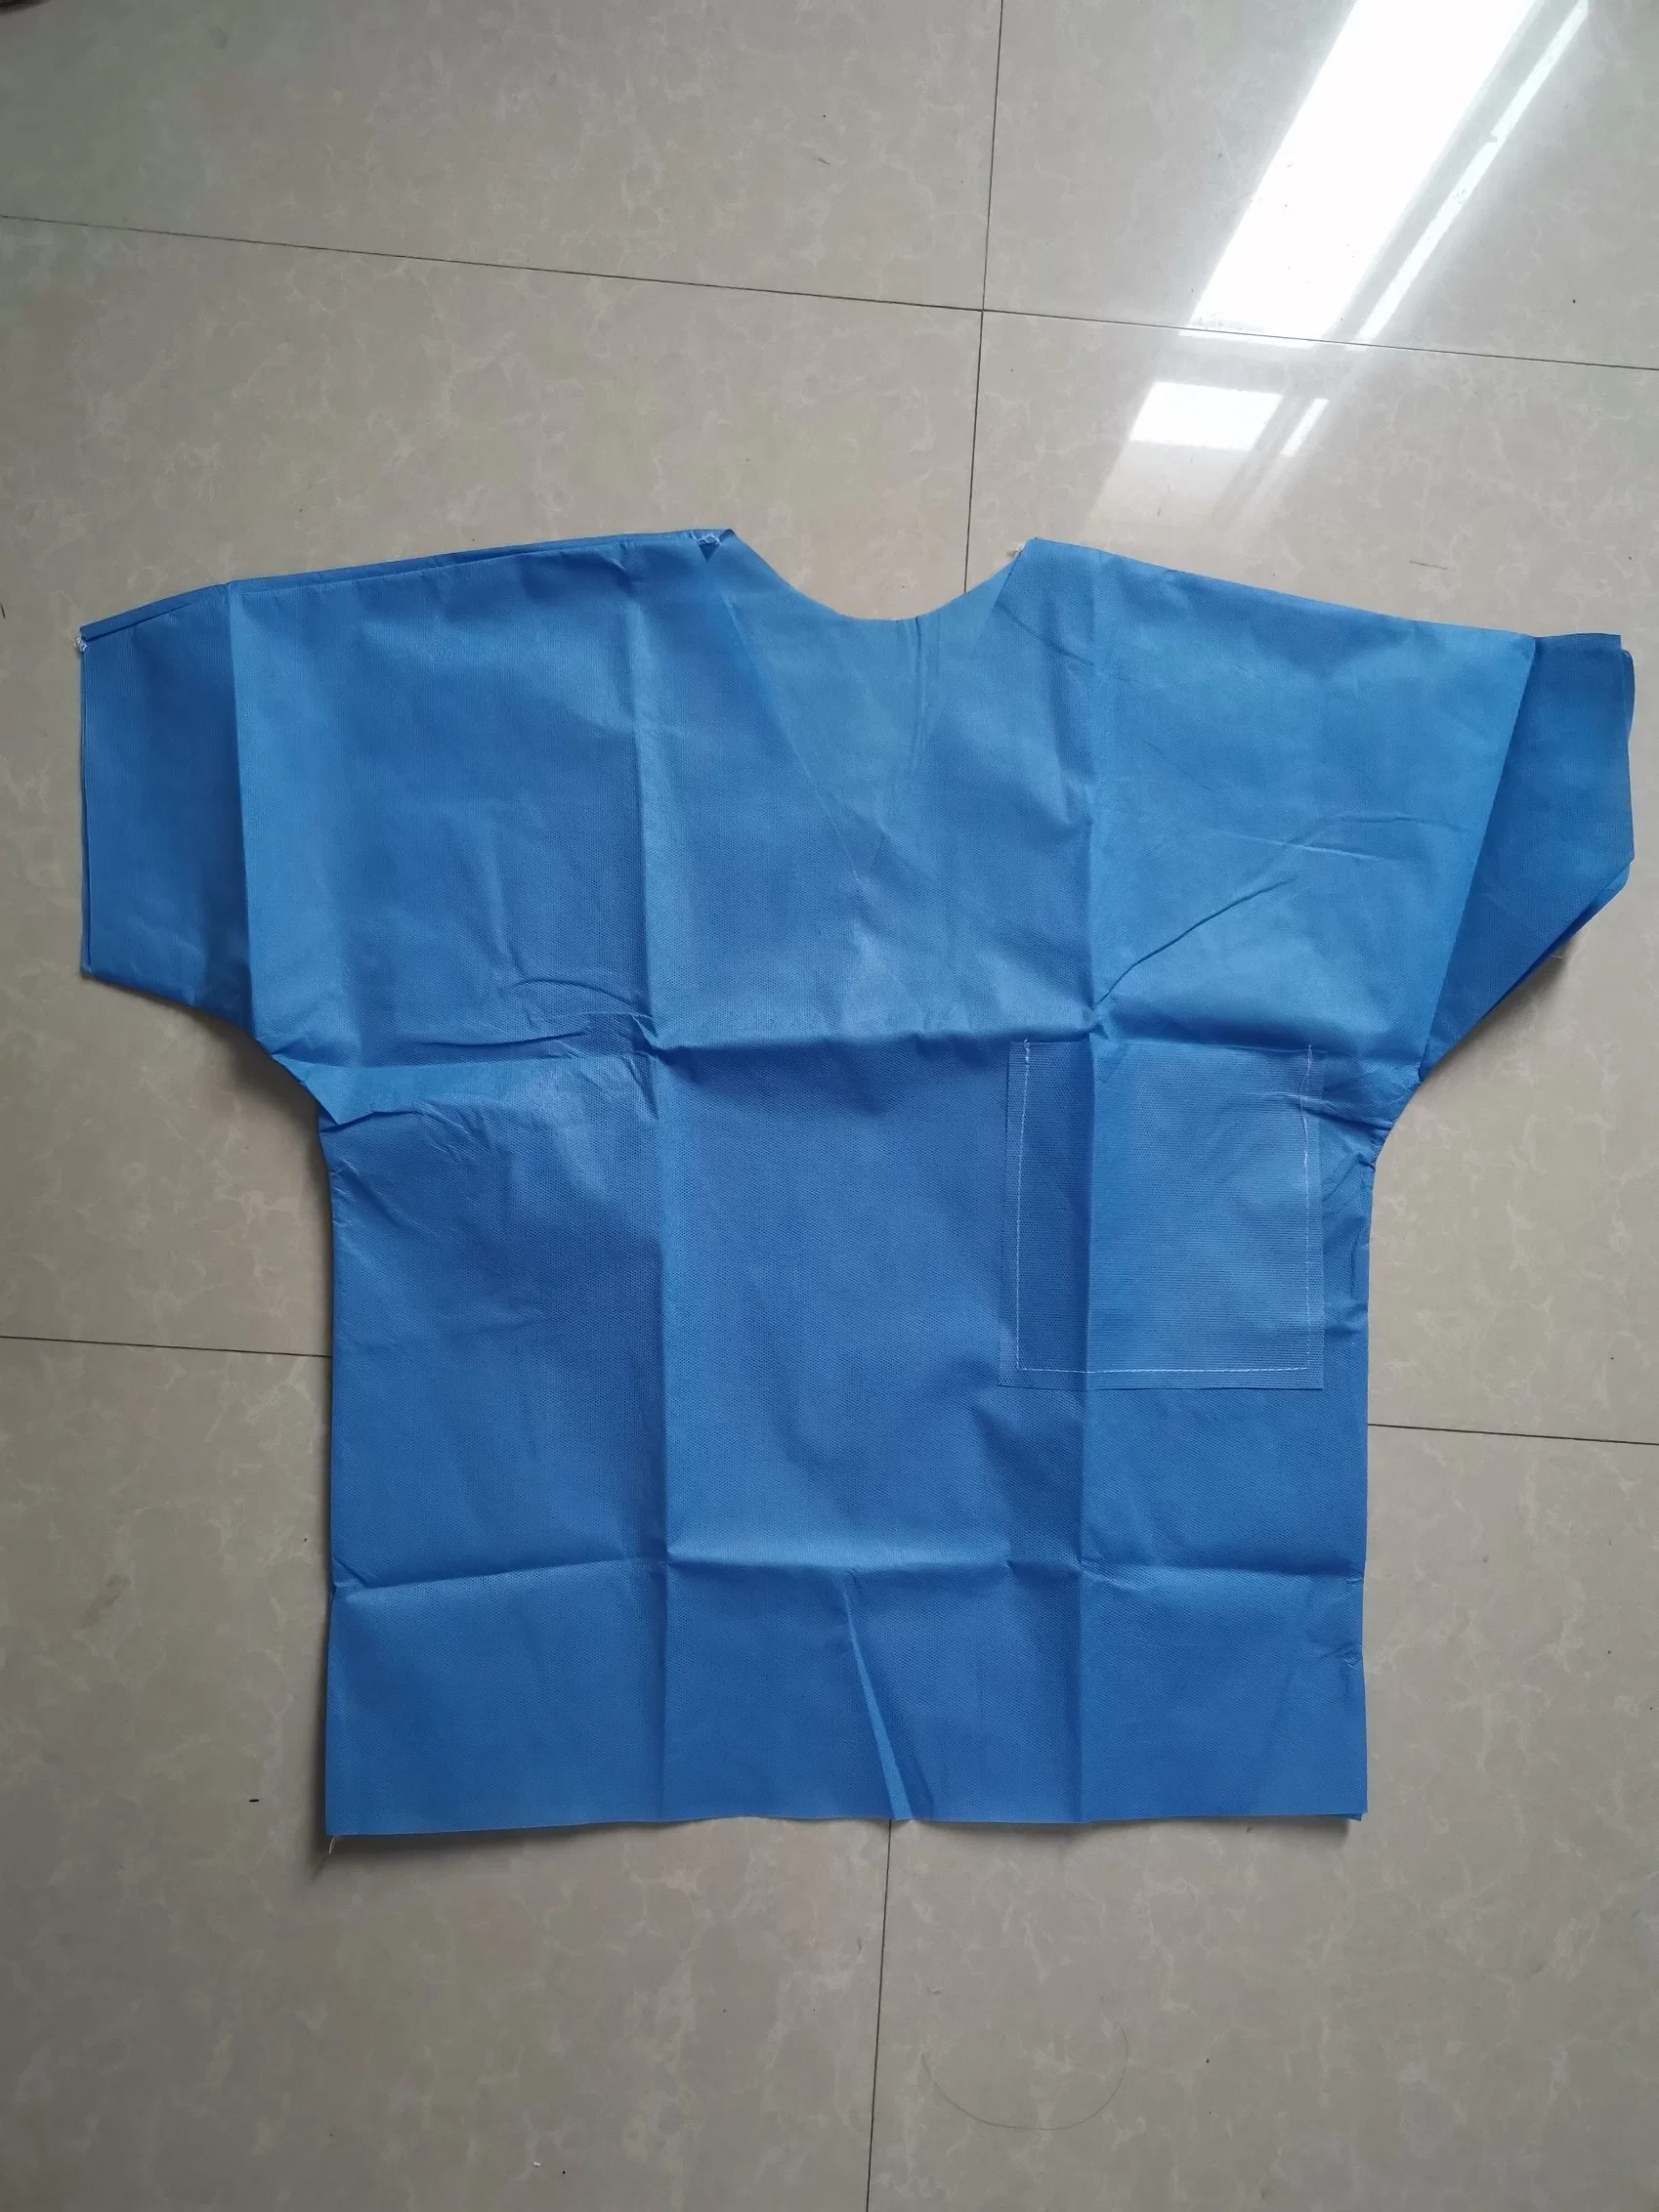 PP SMS 30GSM 45GSM Nonwoven Scrub Suit Sets Hospital Disposable Medical Isloation Gowns for Patient